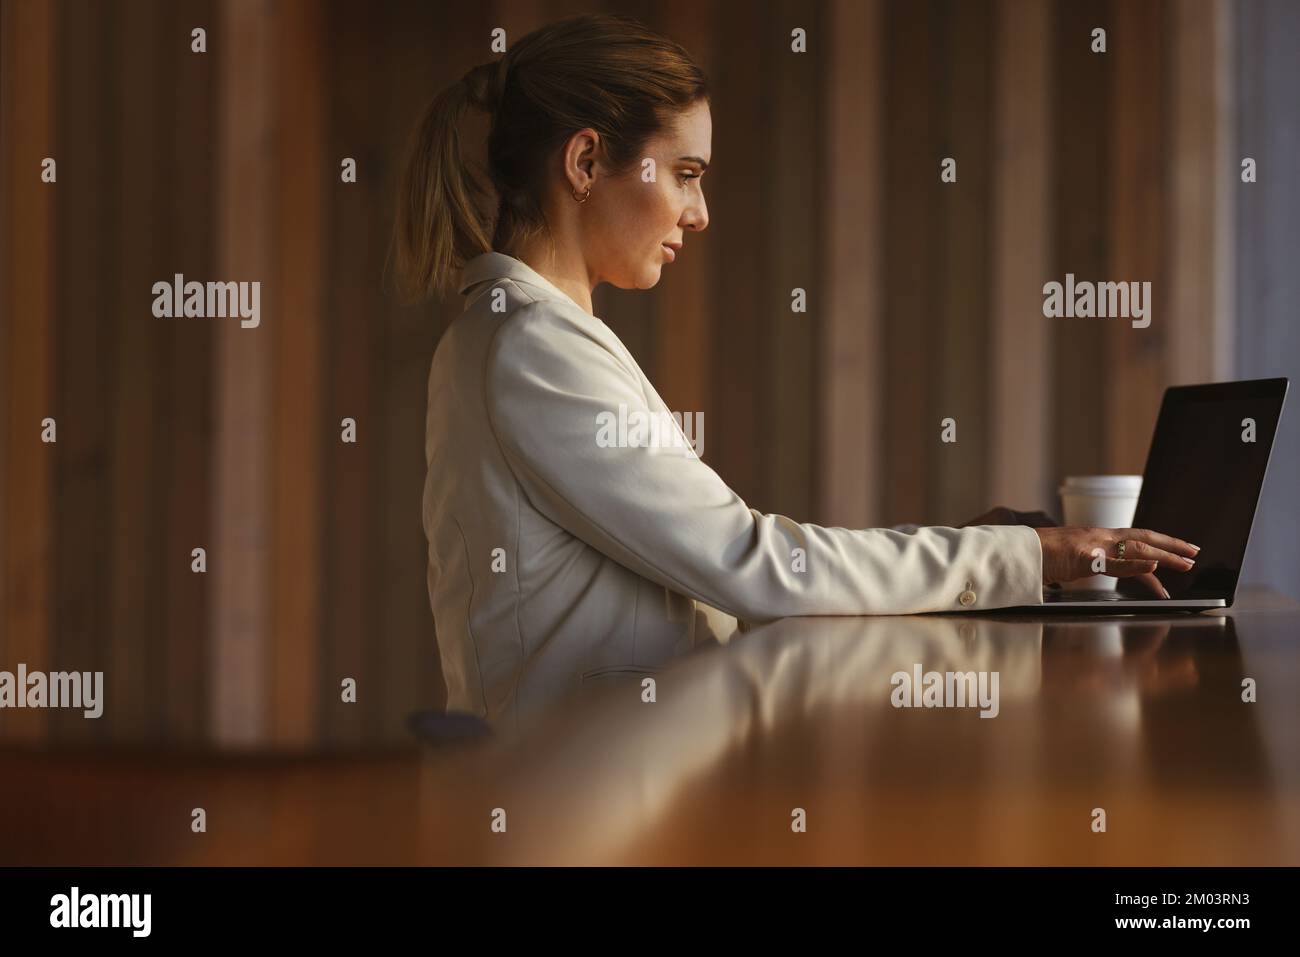 Female developer working on a laptop in a coworking space. Professional business woman working remotely. Woman doing freelance tech work. Stock Photo